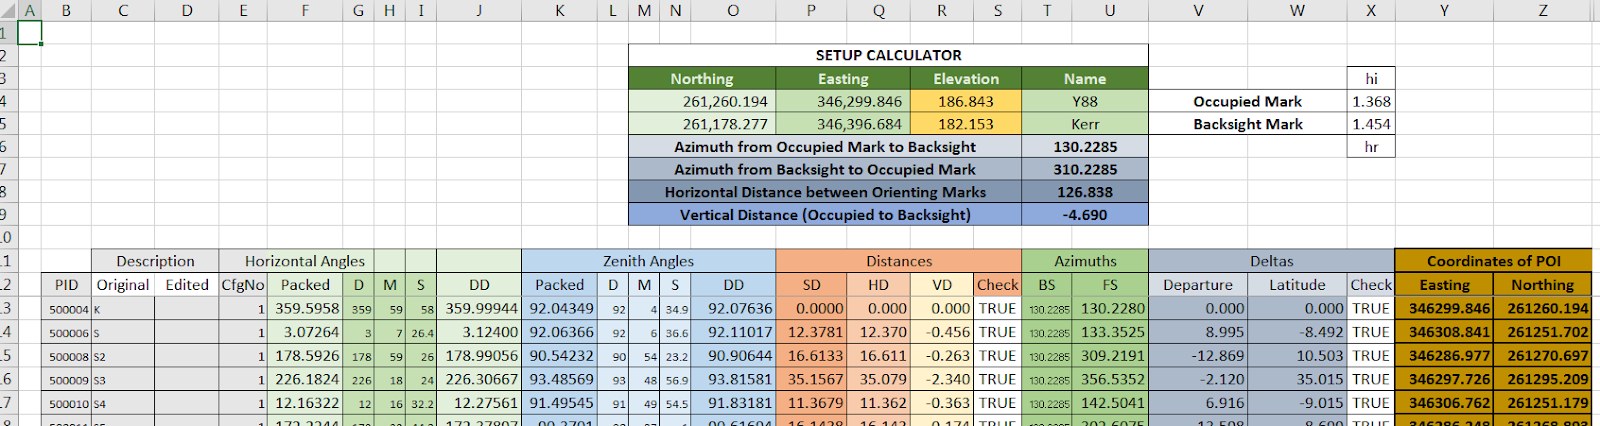 Field data being processed using spreadsheet software